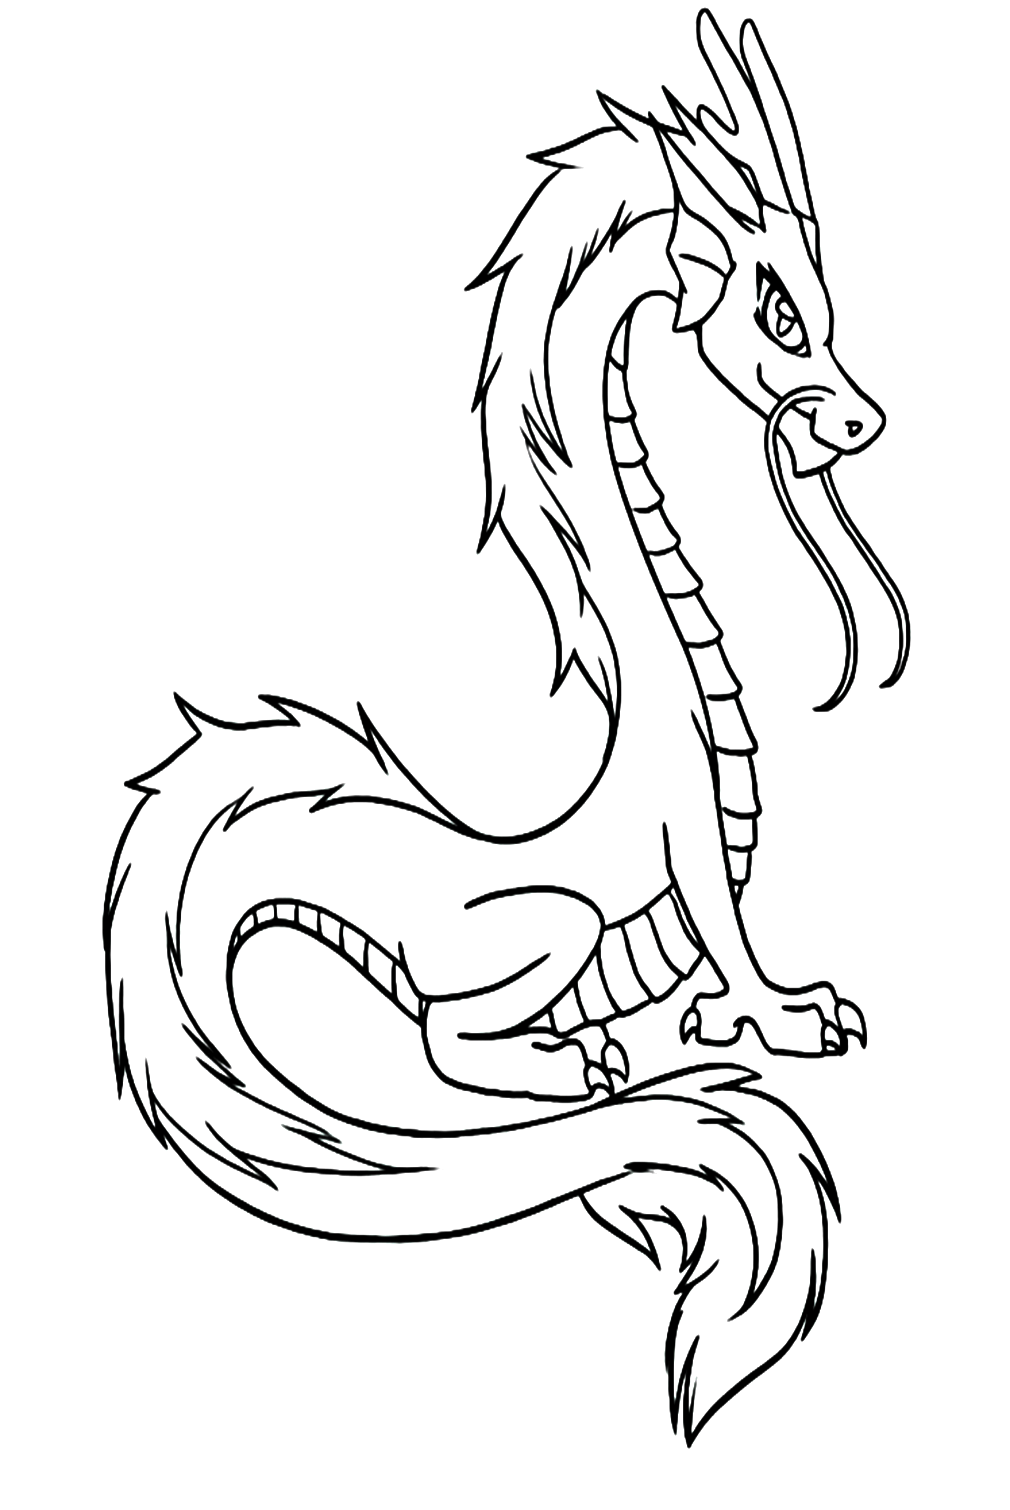 Best Dragon Coloring Sheet Coloring Pages - Dragon Coloring Pages ...